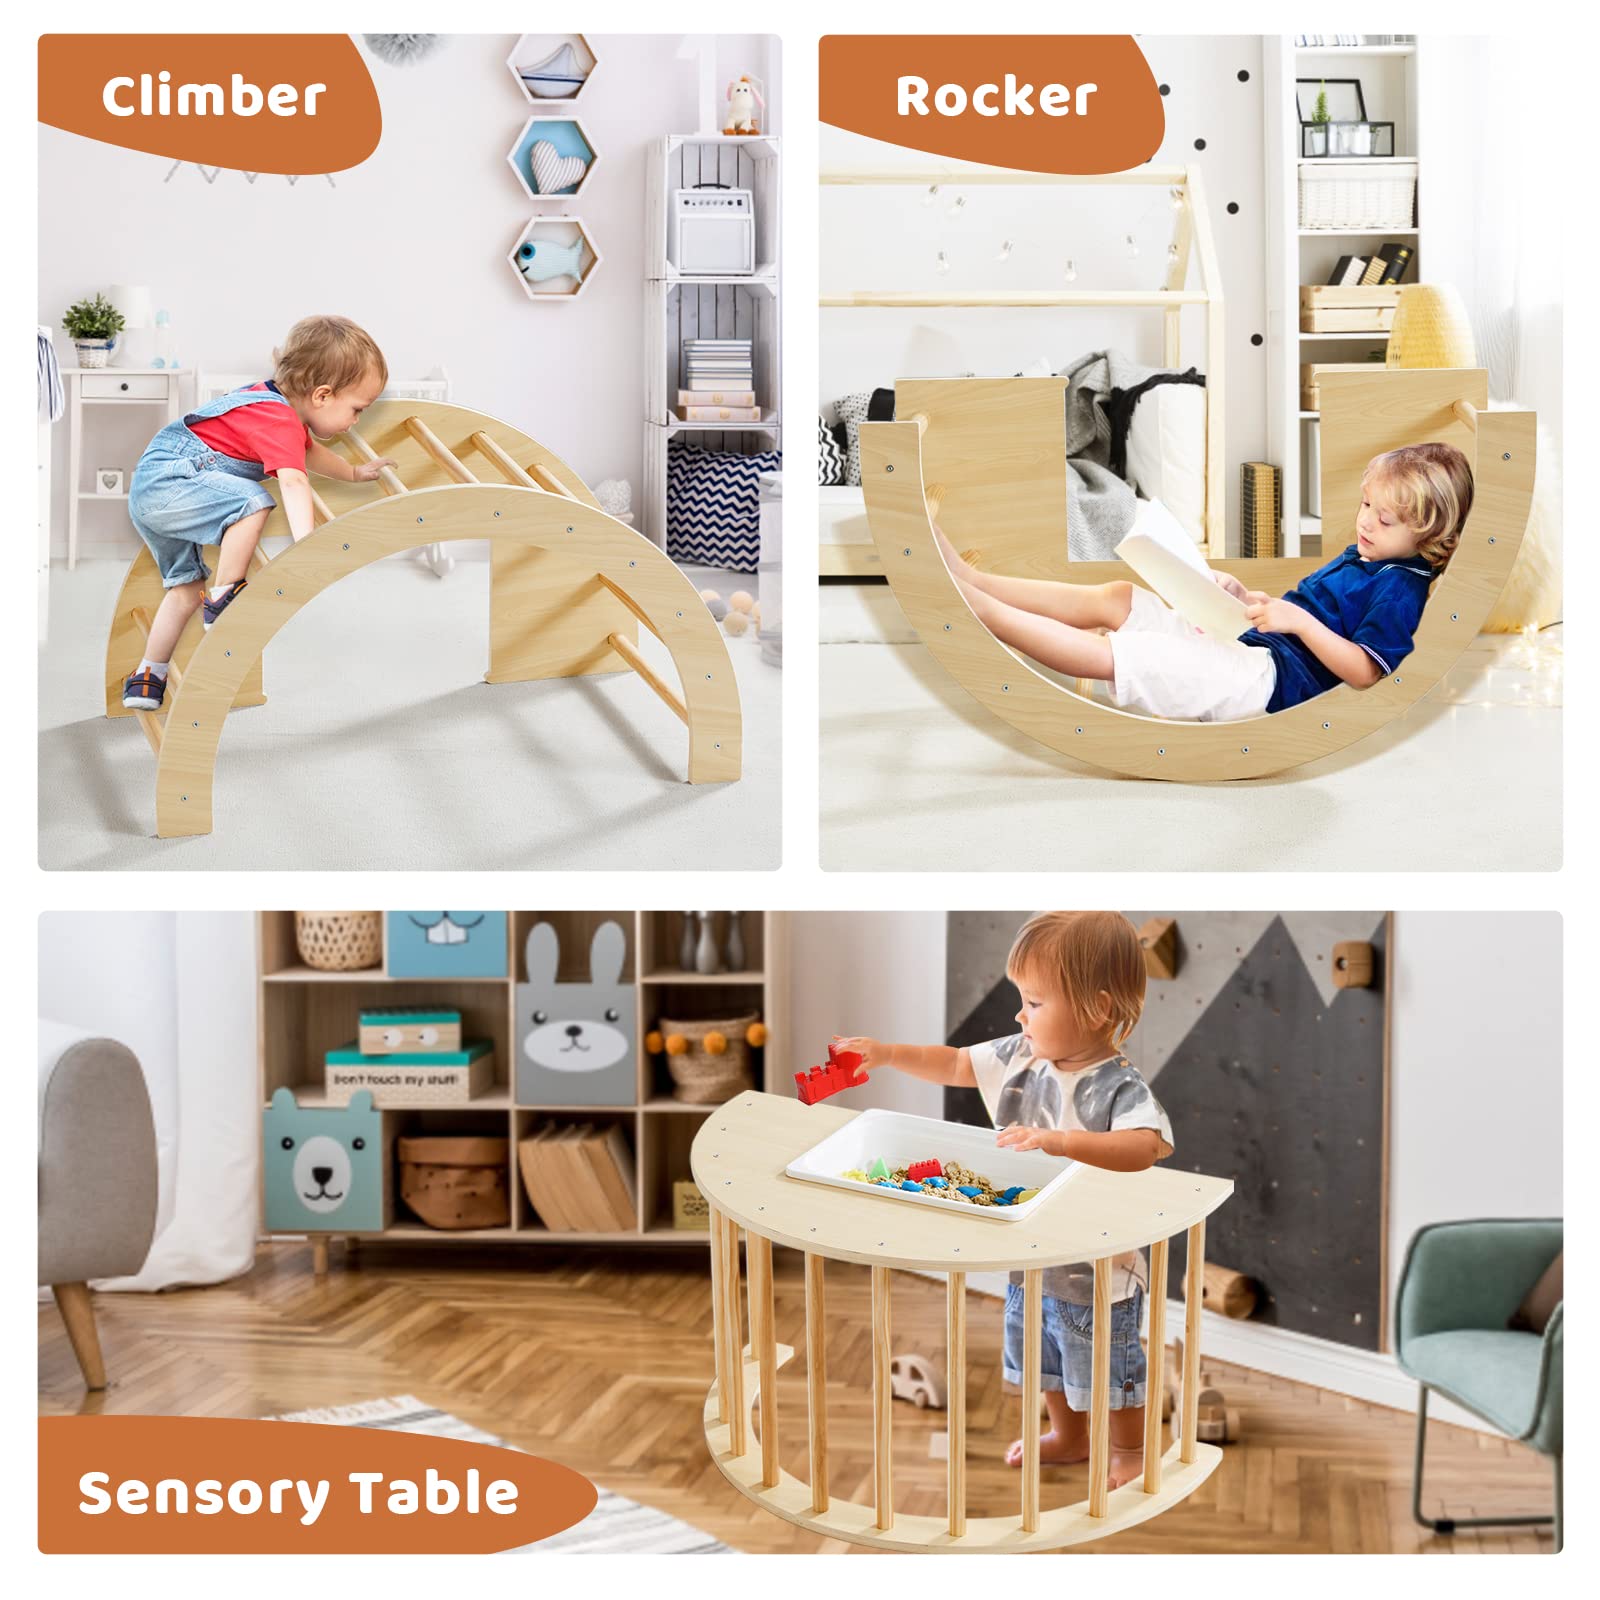 Beright 5 in1 Climbing Arch Sensory Table for Kids, Montessori Climbing Gym, Rocker Board Wooden Toy with Collapsible Storage Bin, Learning Playset